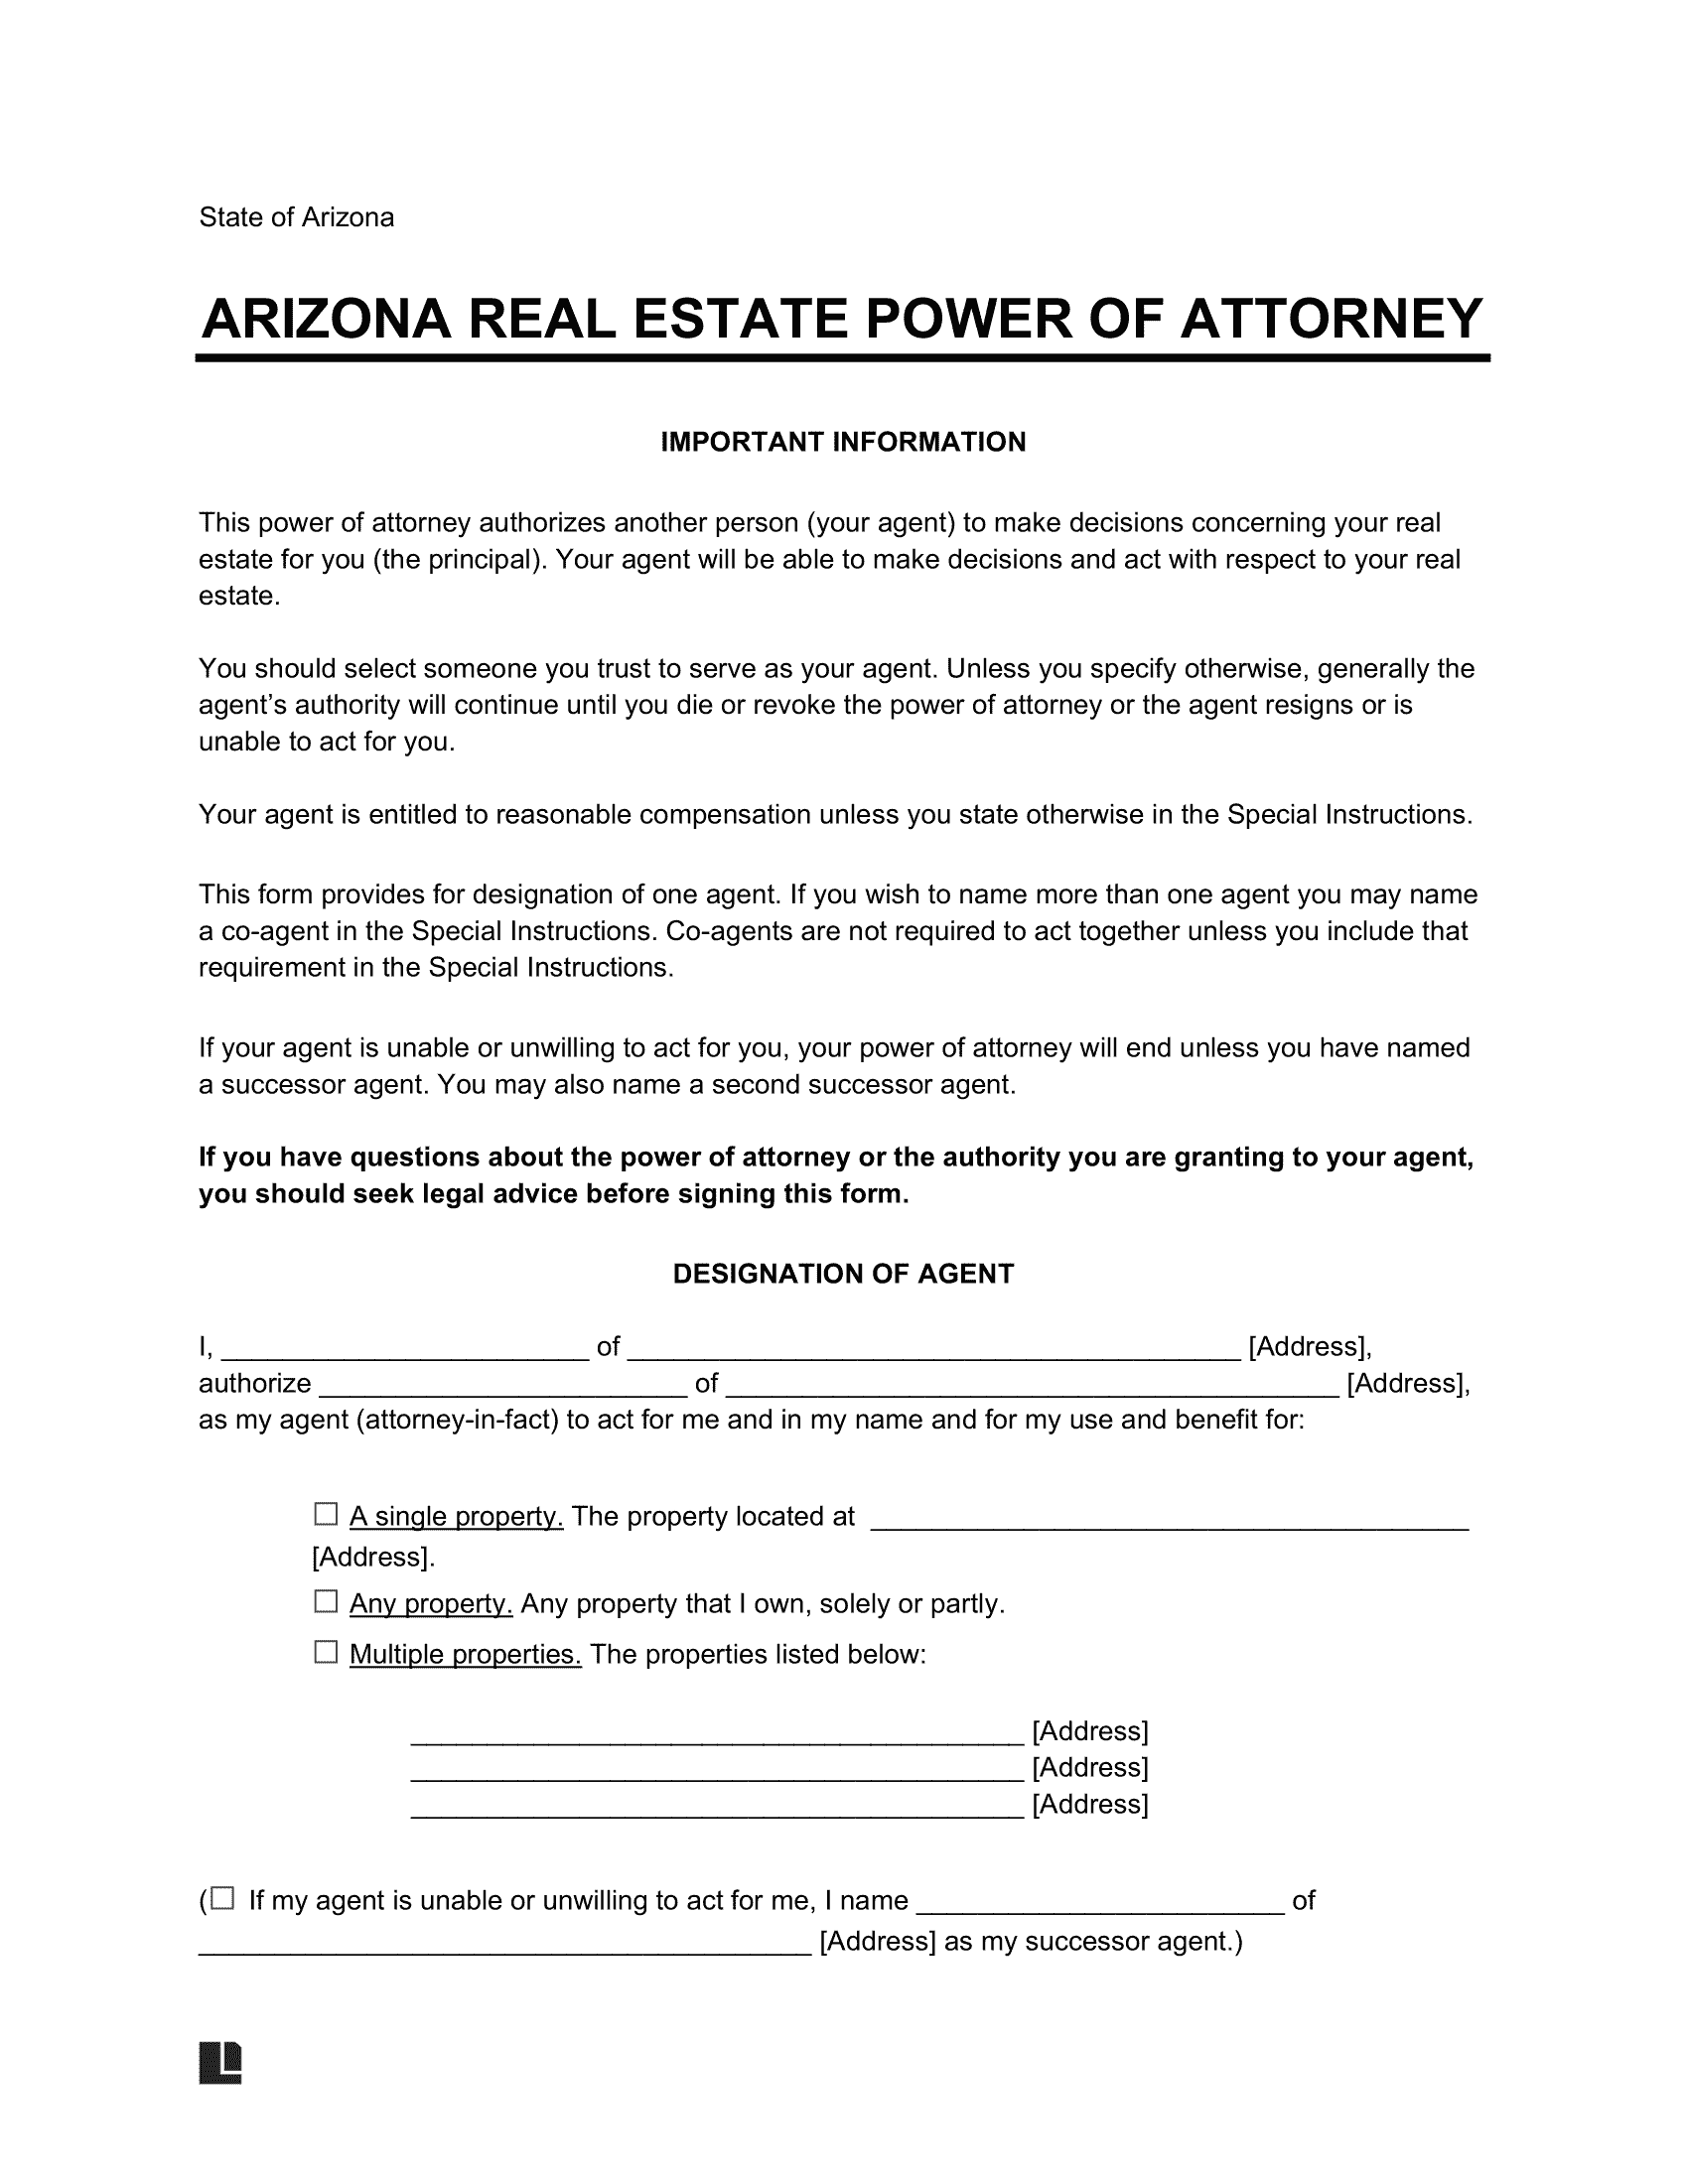 Arizona Real Estate Power of Attorney Form